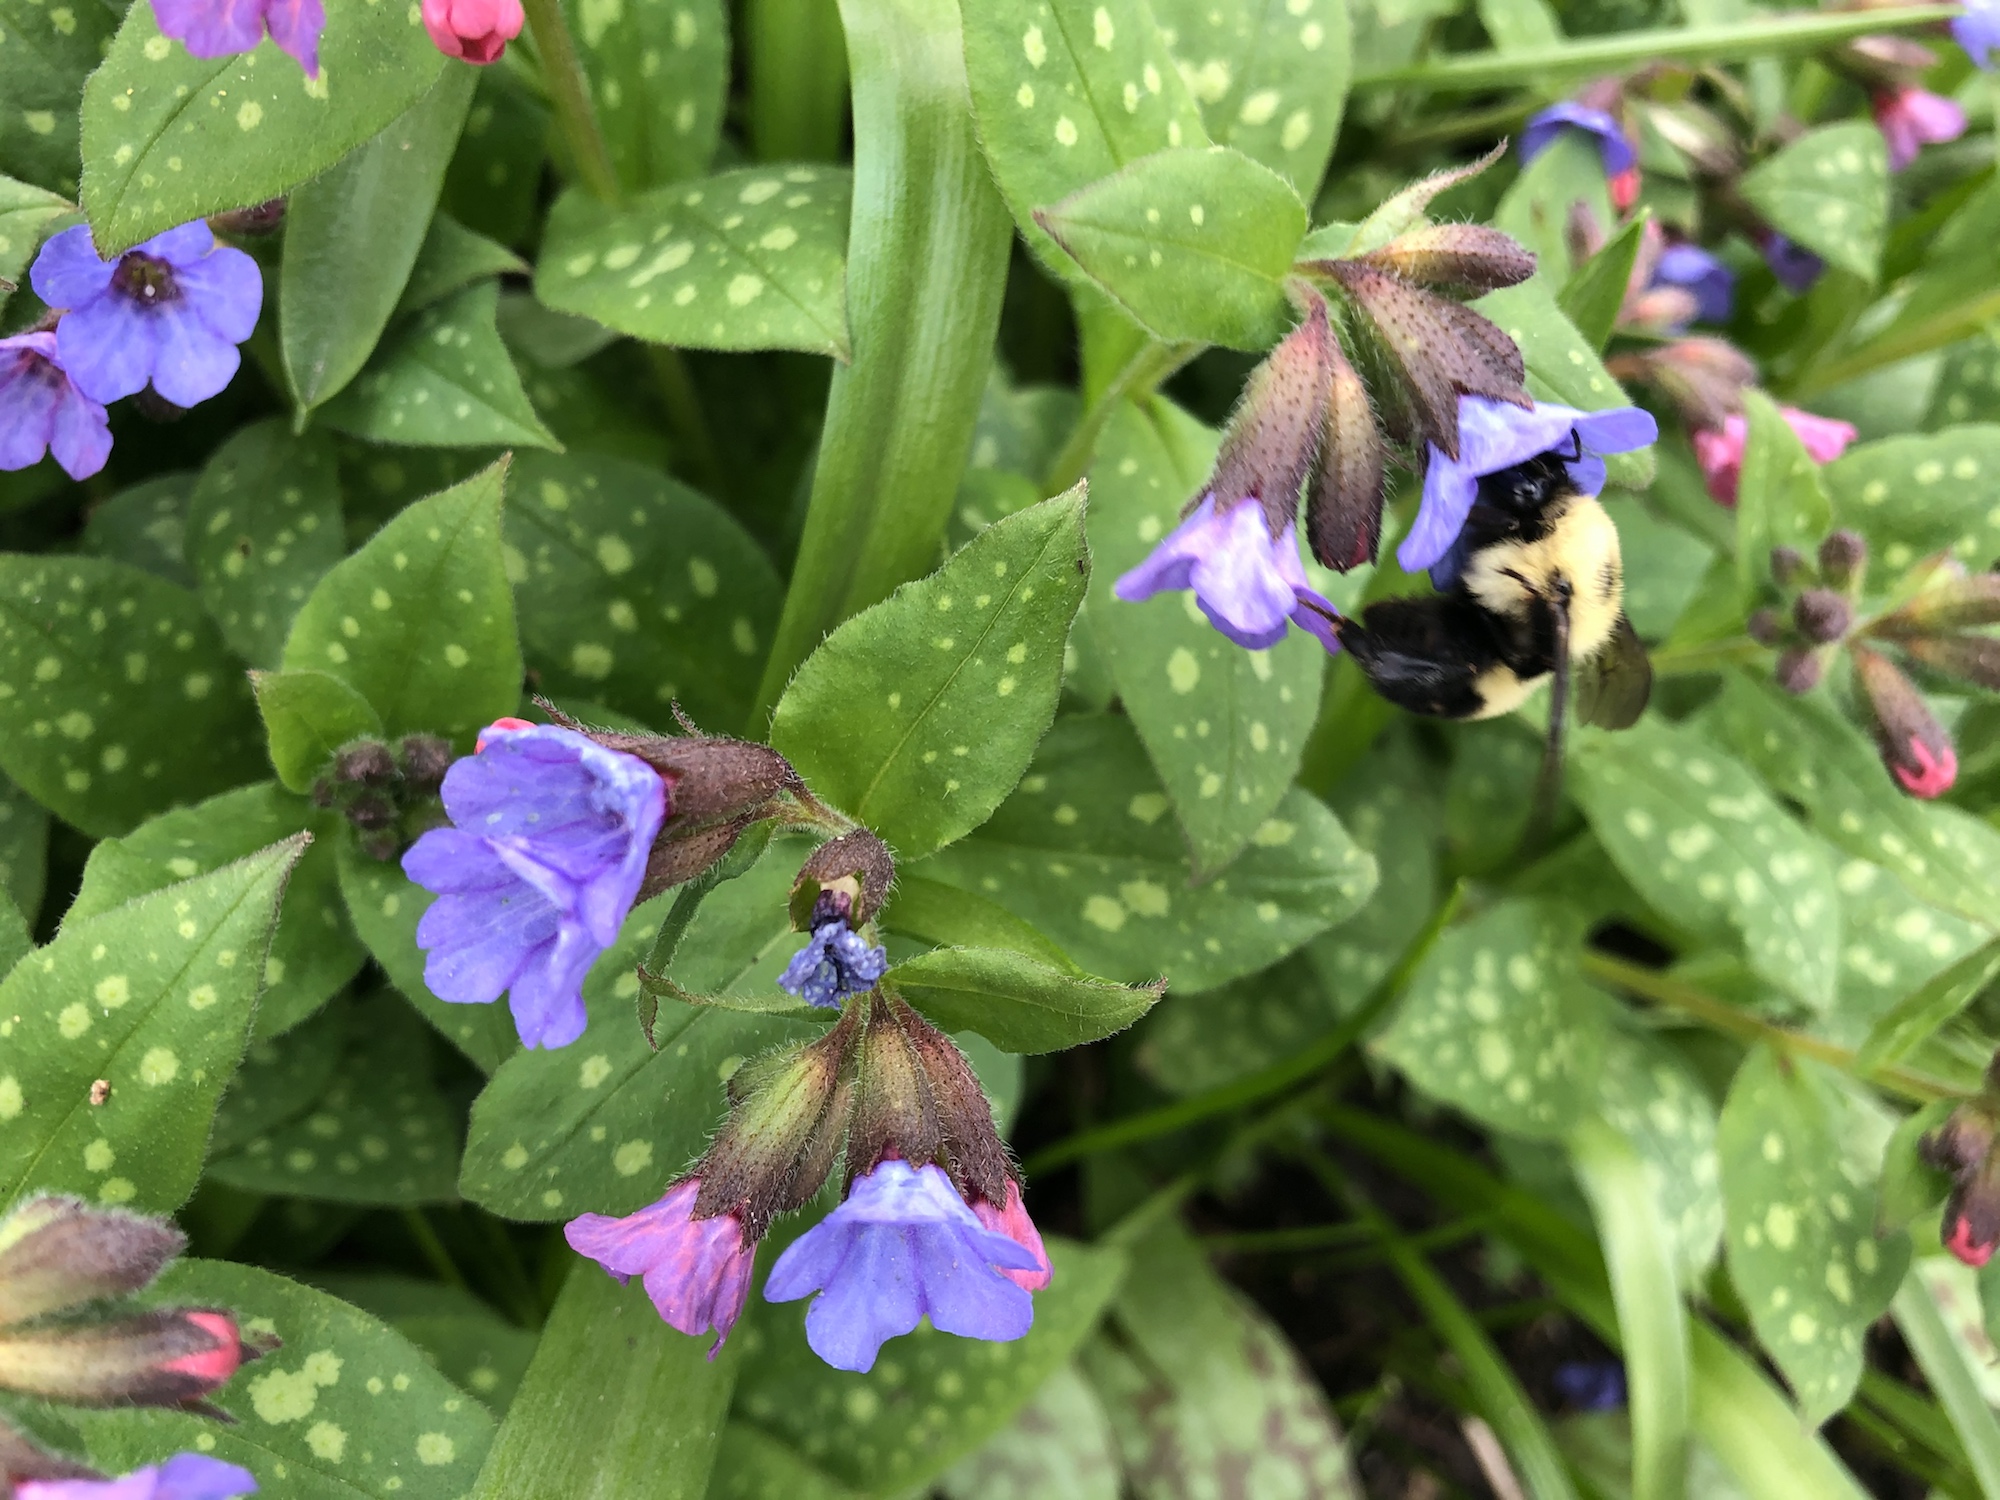 Lungwort near Agawa Path in Nakoma in Madison, Wisconsin on May 1, 2020.